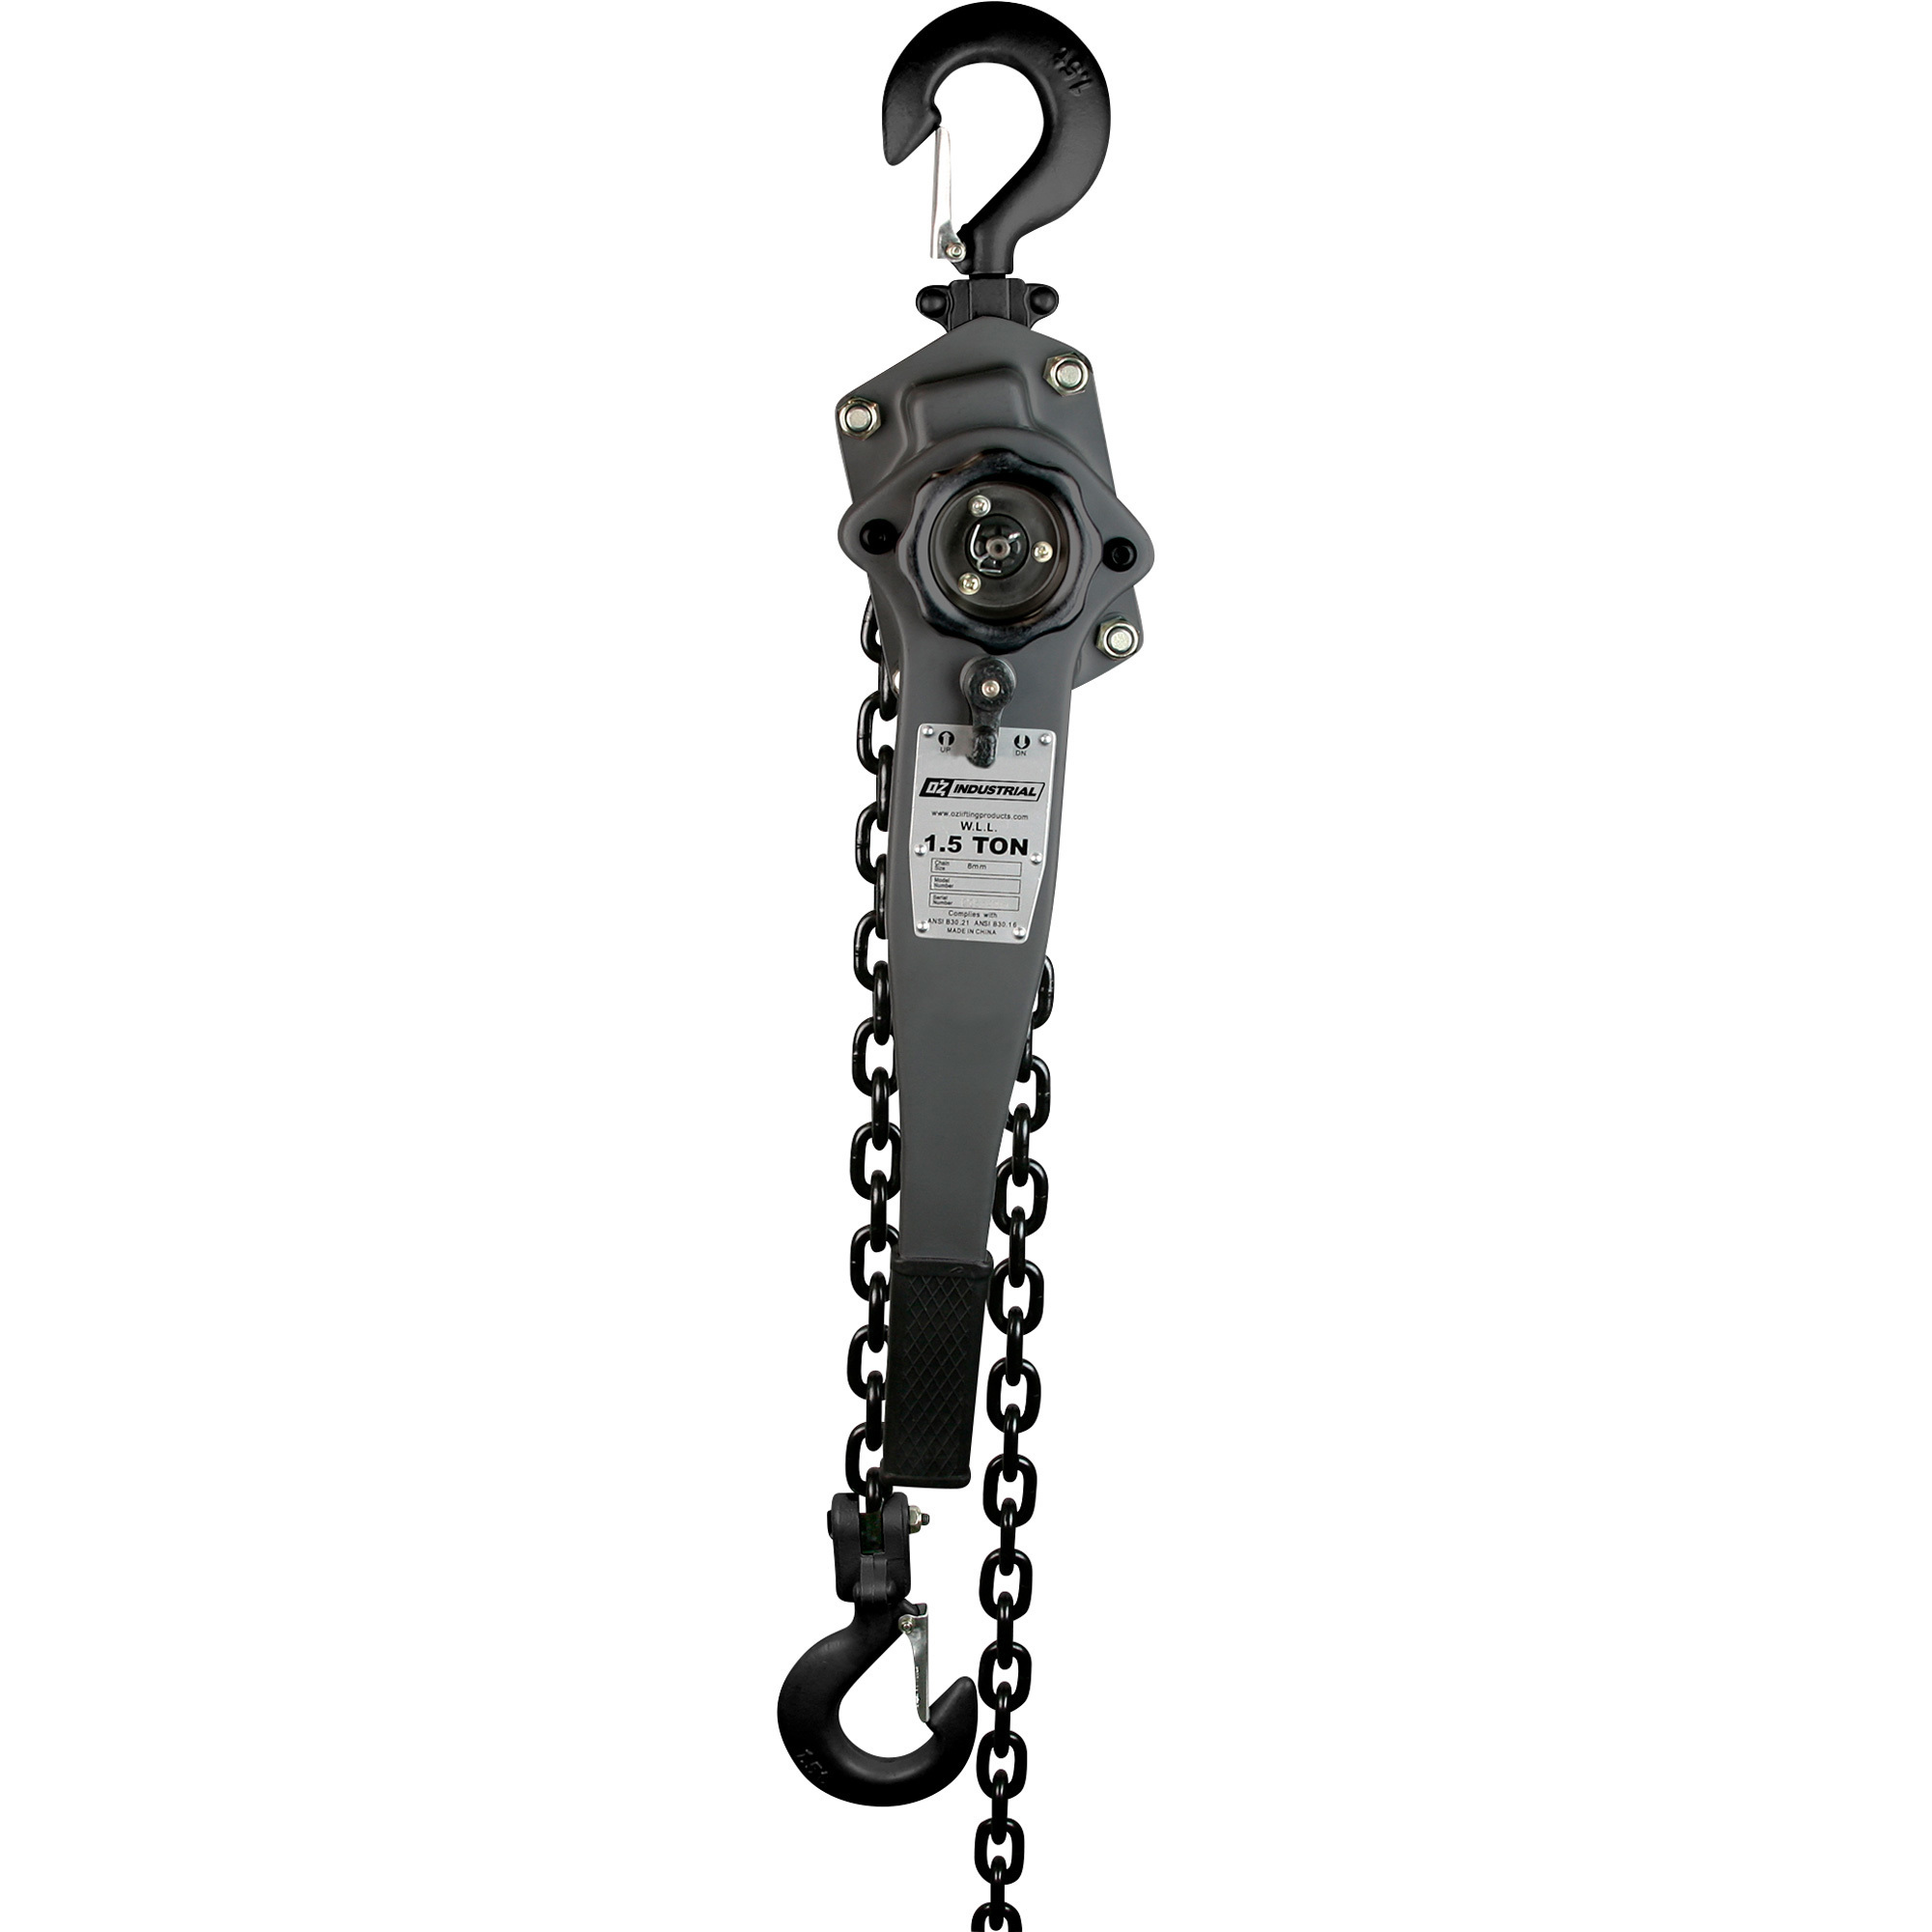 OZ Lifting Products Industrial Series Lever Hoist â 1 1/2-Ton Capacity, 10ft. Lift, Model OZIND150-10LH